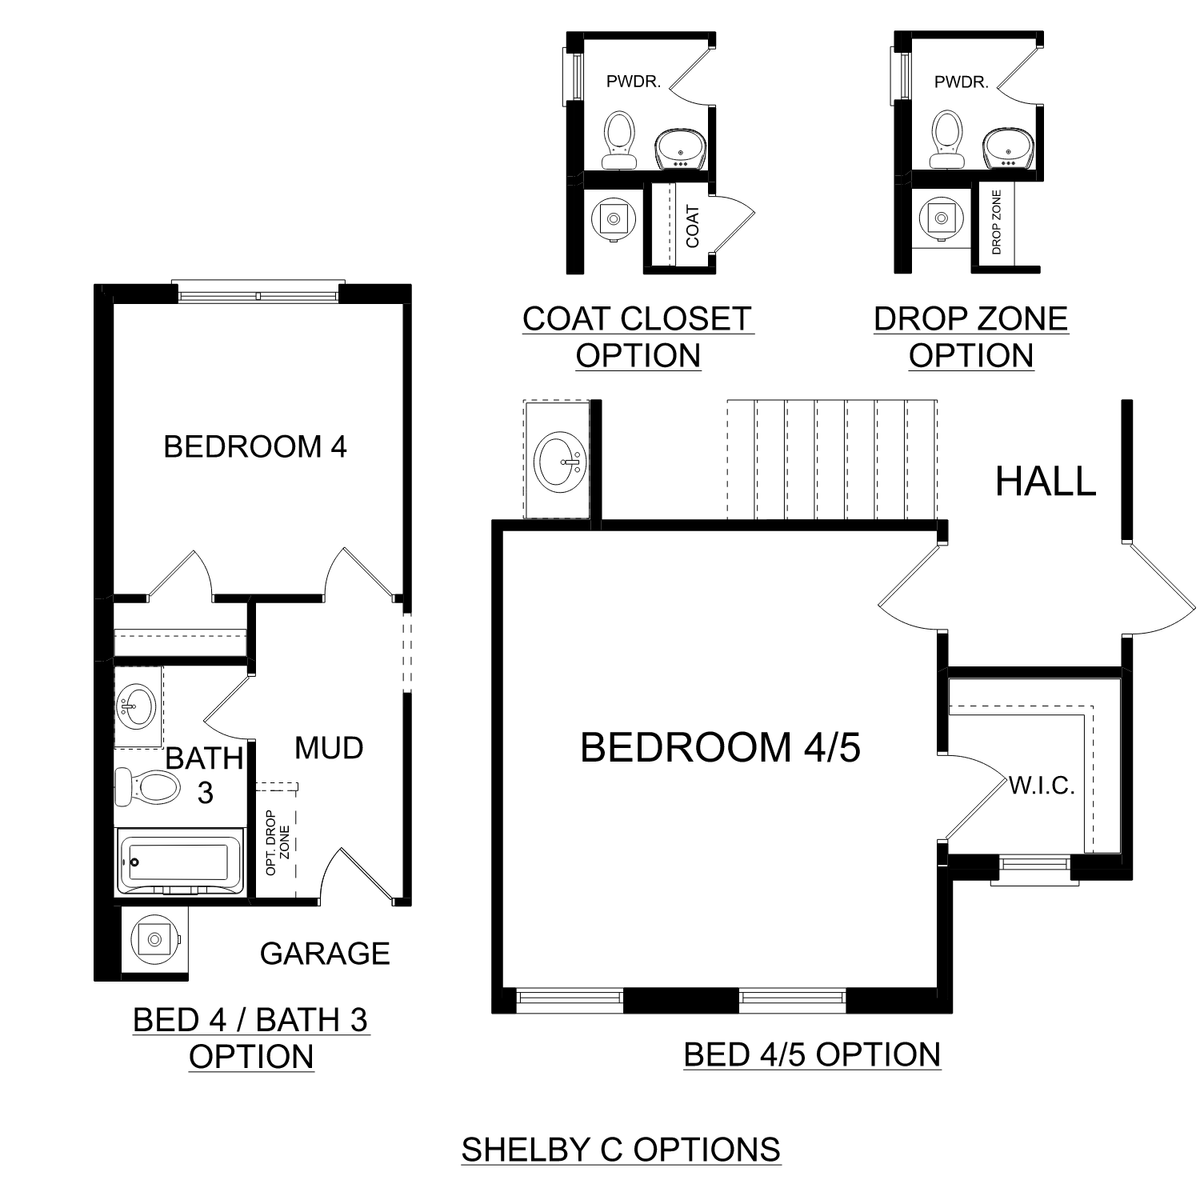 3 - The Shelby C - Side Entry floor plan layout for 314 Creek Grove Avenue in Davidson Homes' Creek Grove community.